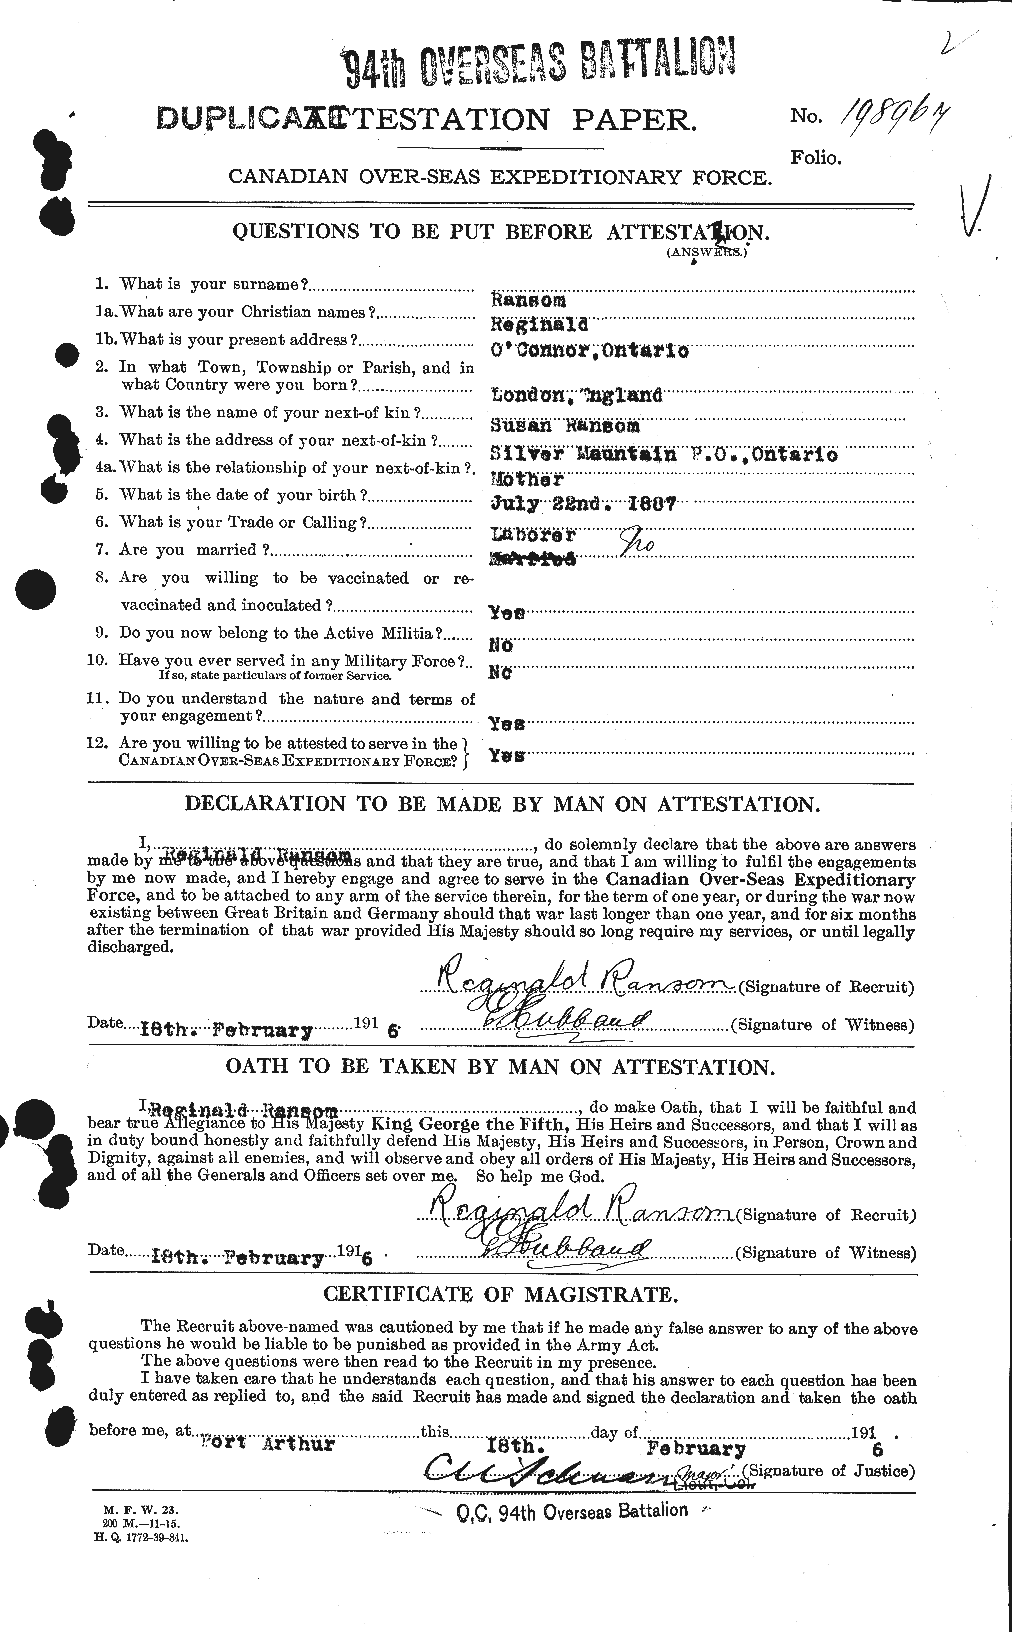 Personnel Records of the First World War - CEF 594897a